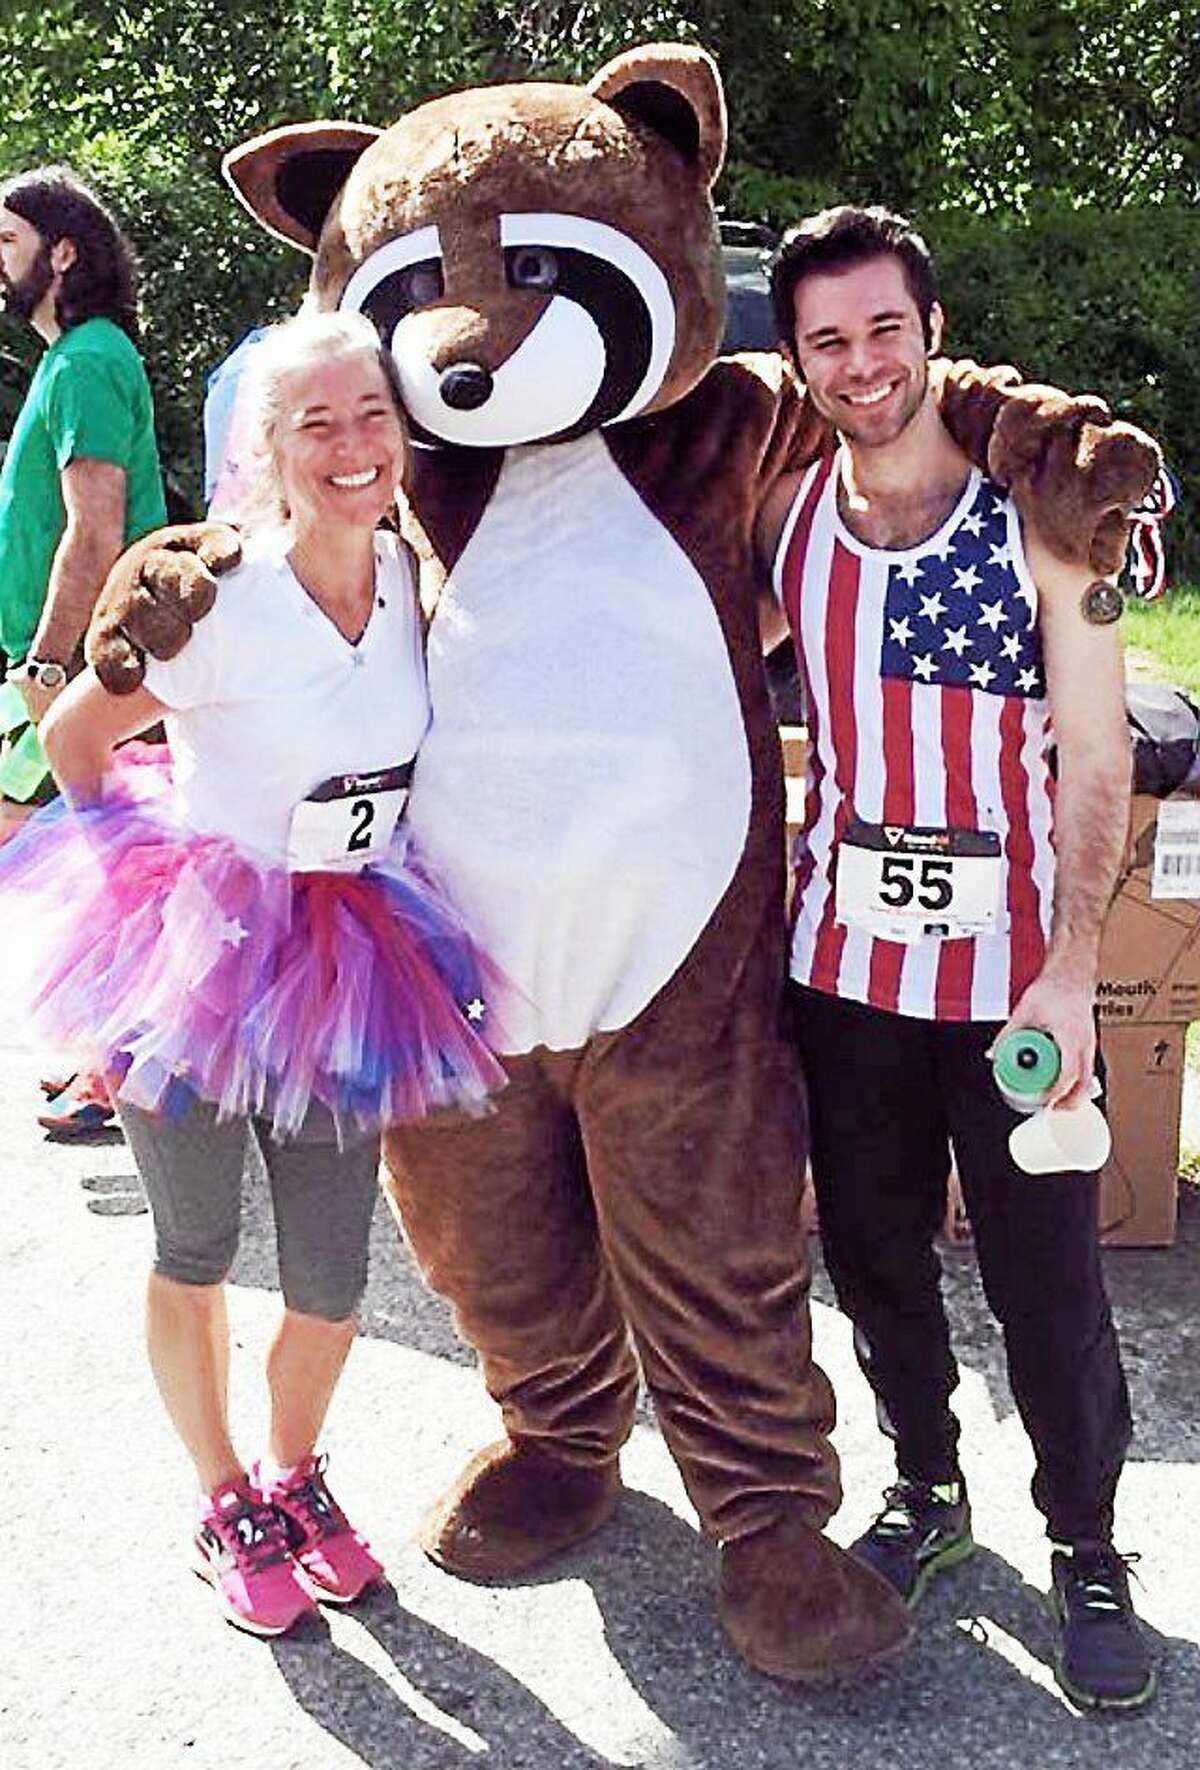 Middletown runner Julie Cesare, left, wears her trademark tutu to one of the many races she’s taken part in since suffering a traumatic brain injury. She is pictured with her son, Travis Rock, also a survivor of a traumatic head injury.